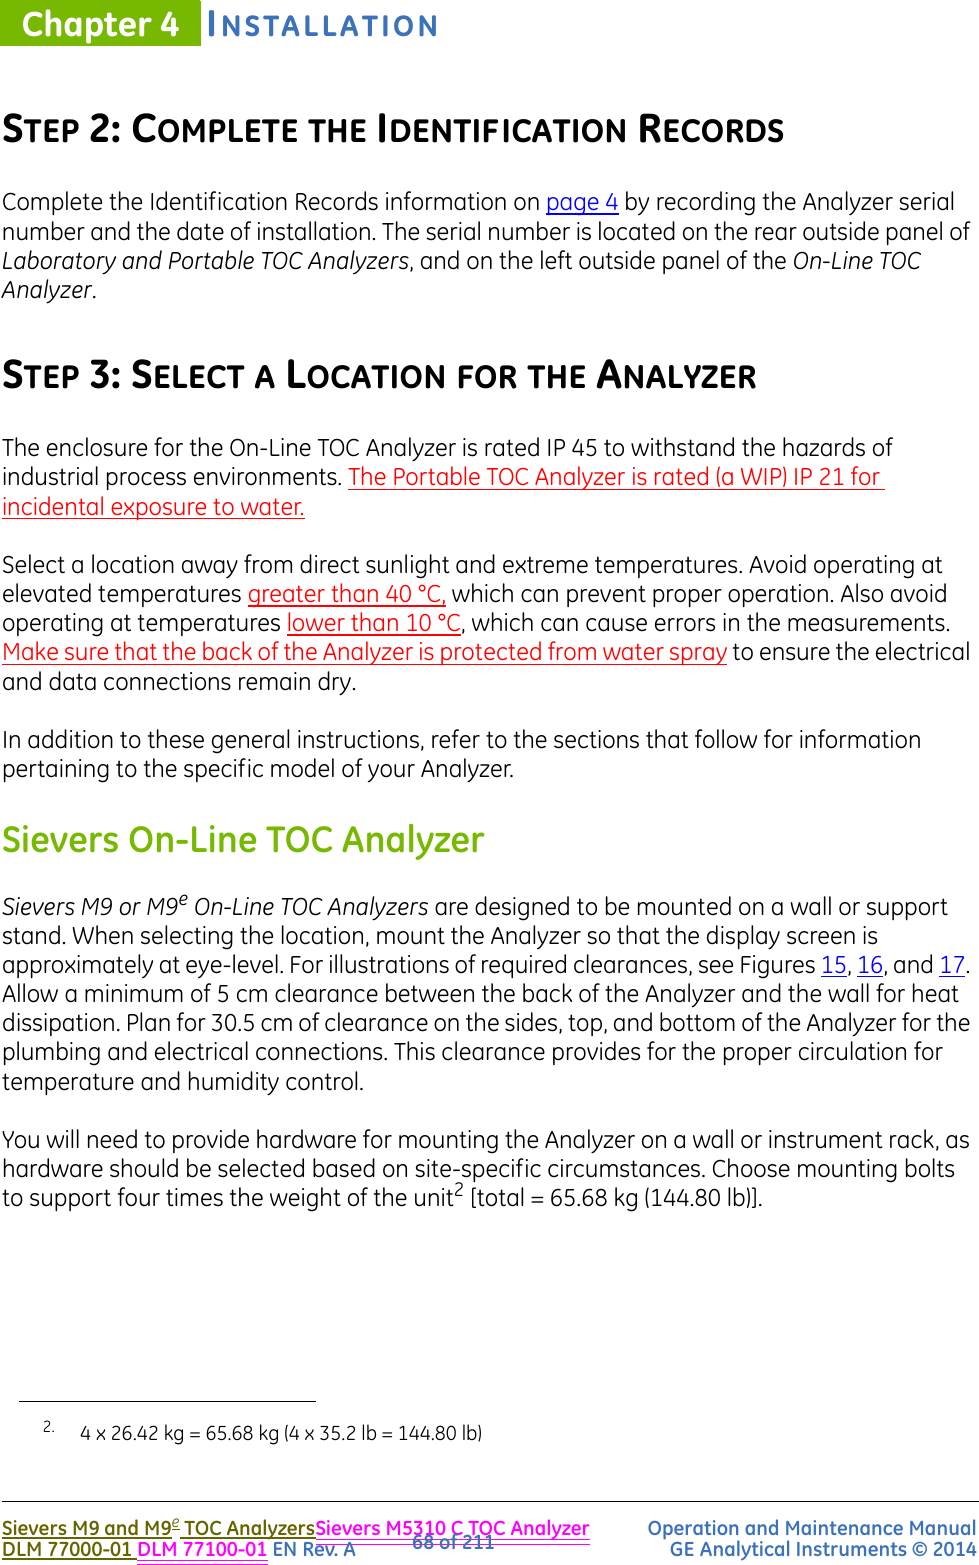 INSTALLATIONChapter 4Sievers M9 and M9e TOC AnalyzersSievers M5310 C TOC Analyzer Operation and Maintenance ManualDLM 77000-01 DLM 77100-01 EN Rev. A GE Analytical Instruments © 201468 of 211STEP 2: COMPLETE THE IDENTIFICATION RECORDSComplete the Identification Records information on page 4 by recording the Analyzer serial number and the date of installation. The serial number is located on the rear outside panel of Laboratory and Portable TOC Analyzers, and on the left outside panel of the On-Line TOC Analyzer.STEP 3: SELECT A LOCATION FOR THE ANALYZERThe enclosure for the On-Line TOC Analyzer is rated IP 45 to withstand the hazards of industrial process environments. The Portable TOC Analyzer is rated (a WIP) IP 21 for incidental exposure to water.Select a location away from direct sunlight and extreme temperatures. Avoid operating at elevated temperatures greater than 40 °C, which can prevent proper operation. Also avoid operating at temperatures lower than 10 °C, which can cause errors in the measurements. Make sure that the back of the Analyzer is protected from water spray to ensure the electrical and data connections remain dry.In addition to these general instructions, refer to the sections that follow for information pertaining to the specific model of your Analyzer.Sievers On-Line TOC AnalyzerSievers M9 or M9e On-Line TOC Analyzers are designed to be mounted on a wall or support stand. When selecting the location, mount the Analyzer so that the display screen is approximately at eye-level. For illustrations of required clearances, see Figures 15, 16, and 17. Allow a minimum of 5 cm clearance between the back of the Analyzer and the wall for heat dissipation. Plan for 30.5 cm of clearance on the sides, top, and bottom of the Analyzer for the plumbing and electrical connections. This clearance provides for the proper circulation for temperature and humidity control. You will need to provide hardware for mounting the Analyzer on a wall or instrument rack, as hardware should be selected based on site-specific circumstances. Choose mounting bolts to support four times the weight of the unit2 [total = 65.68 kg (144.80 lb)].2. 4 x 26.42 kg = 65.68 kg (4 x 35.2 lb = 144.80 lb)